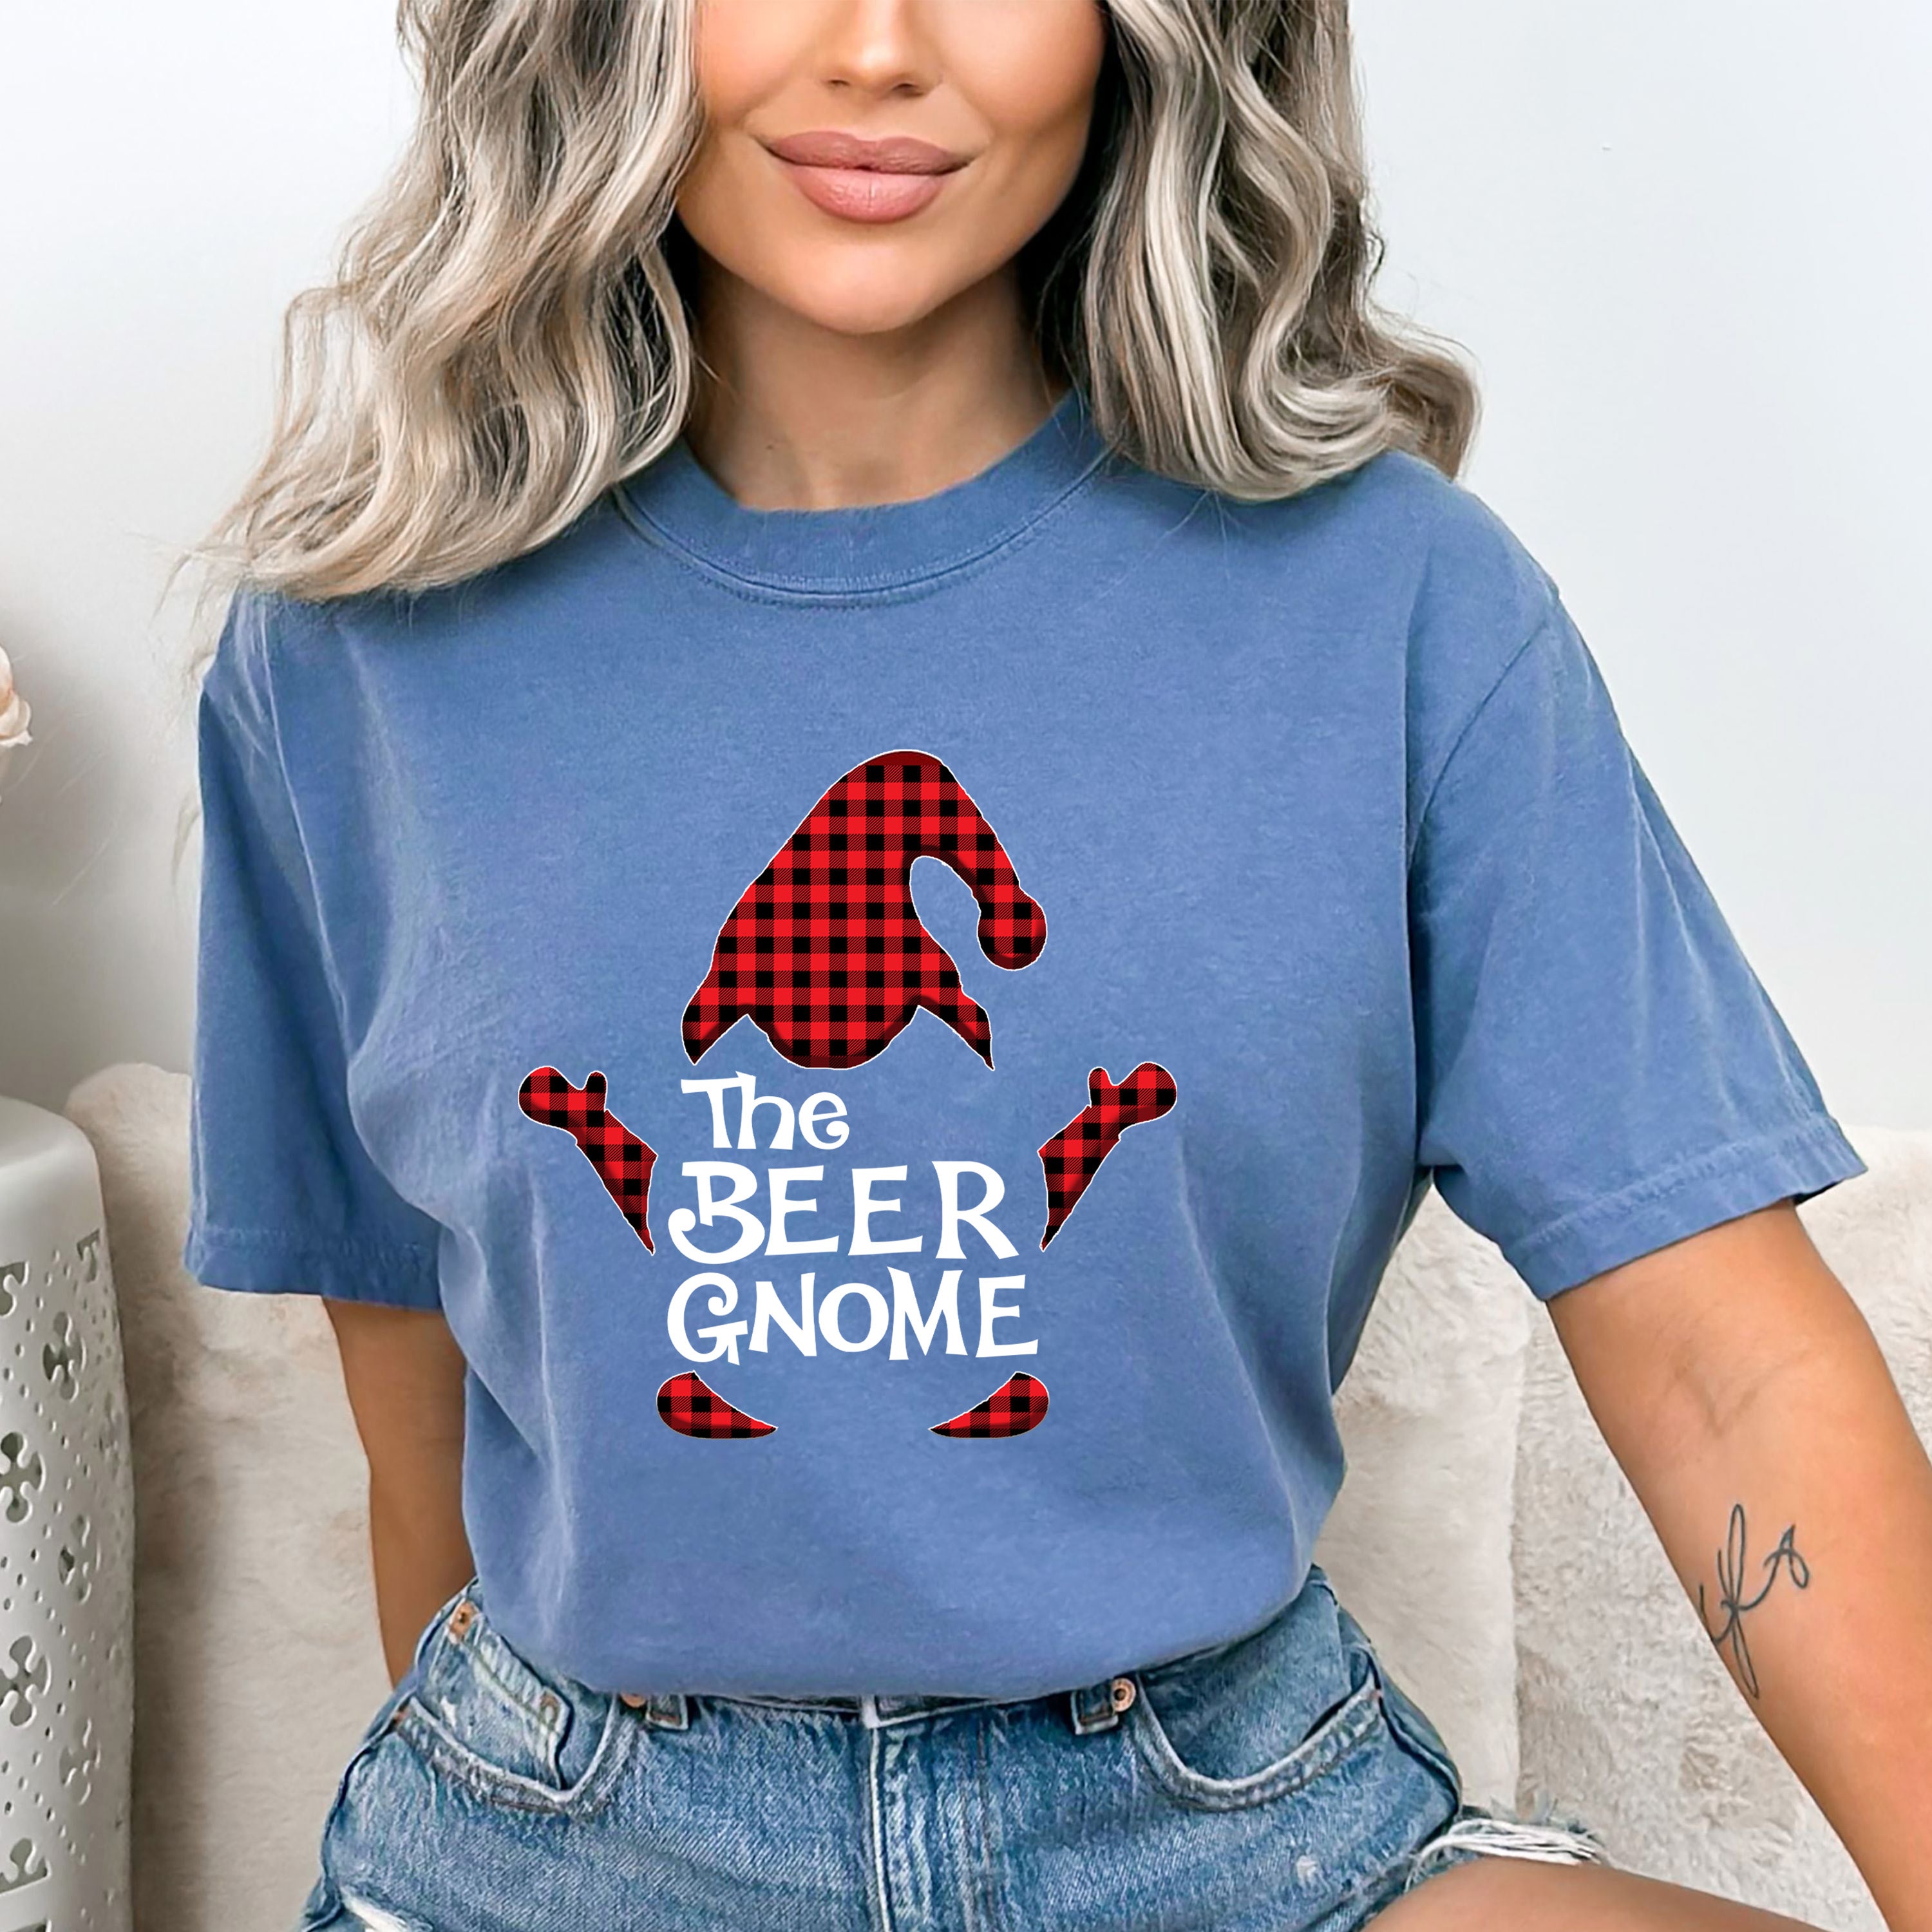 The Beer Gnome - Bella canvas